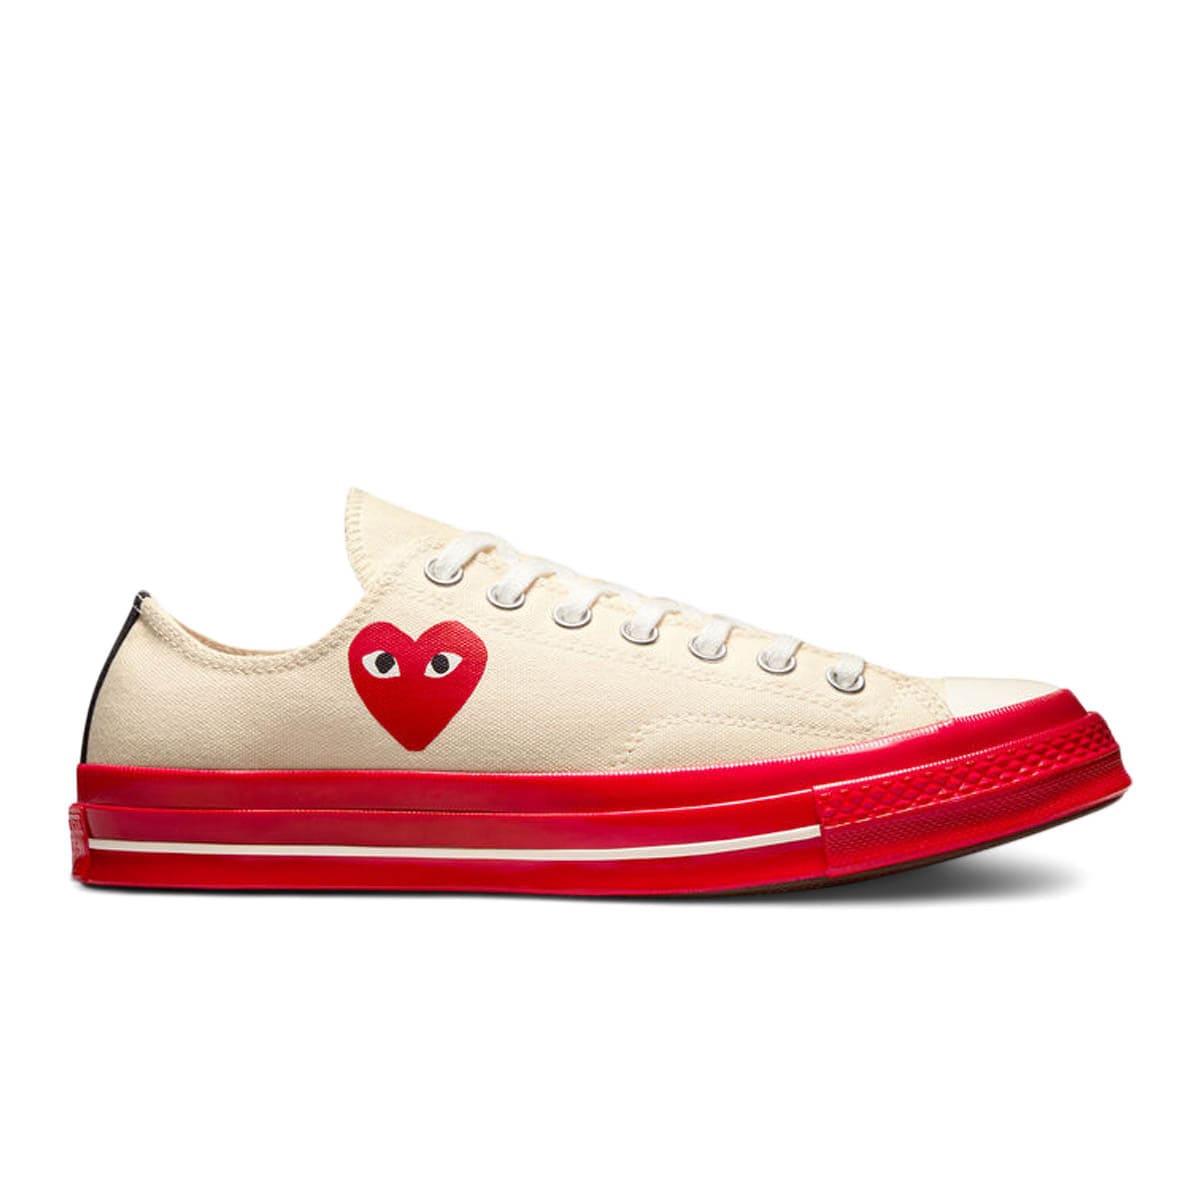 IetpShops – IetpShops Store | converse one star ox casino casinowhitewhite canvas shoessneakers | X CDG PLAY CHUCK LOW OFF WHITE / RED